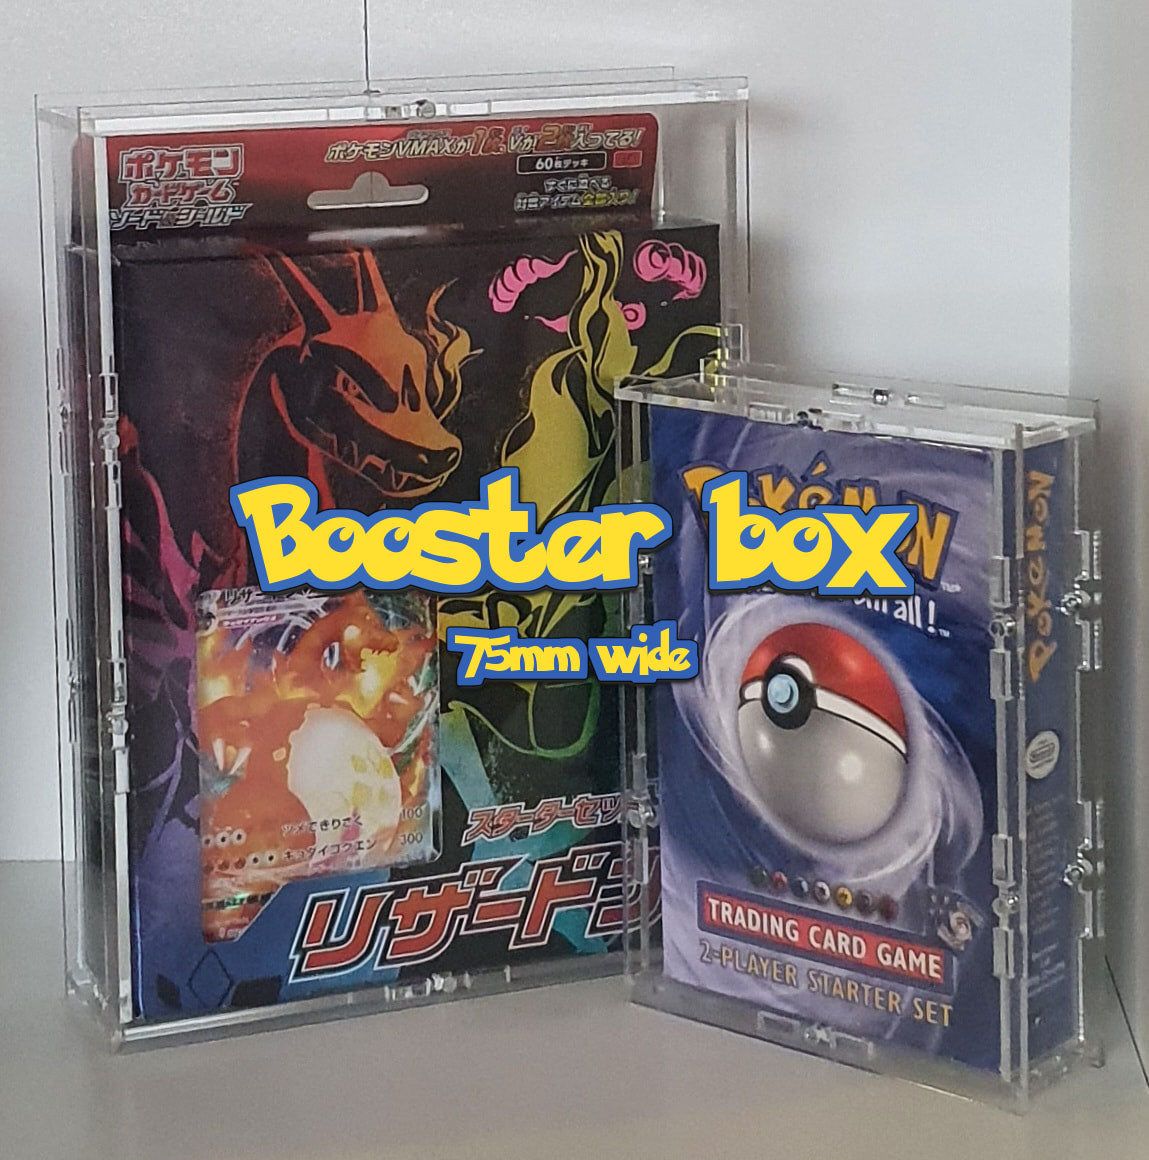 Pandora Case Acrylic Booster Box (75mm wide) Display For Pokemon